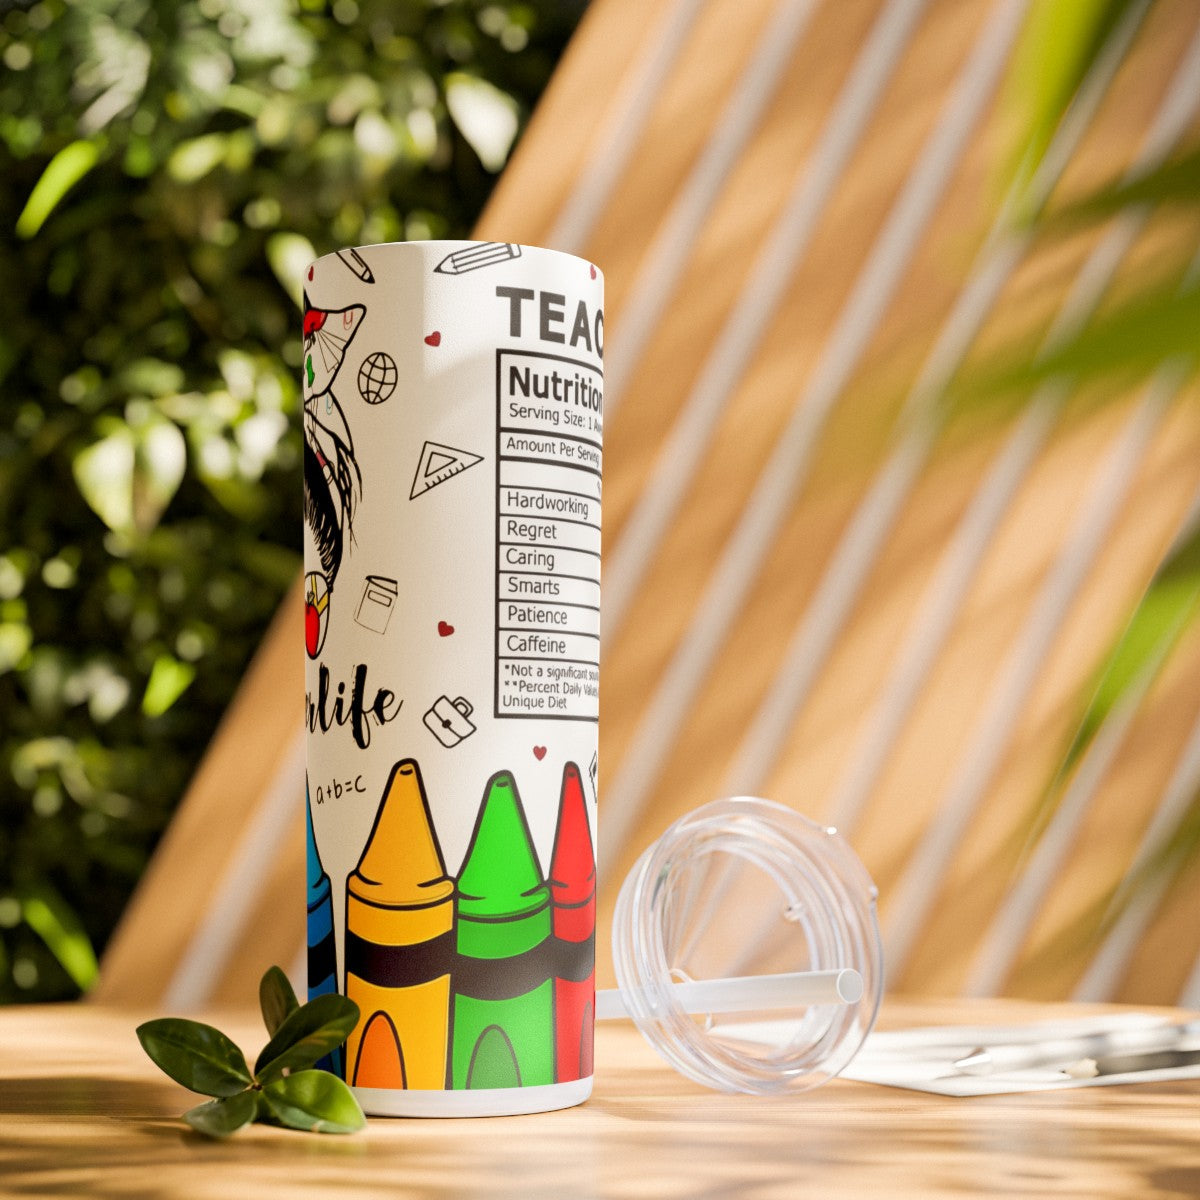 Get trendy with Teacher Life Skinny Tumbler with Straw, 20oz -  available at Good Gift Company. Grab yours for $24.99 today!